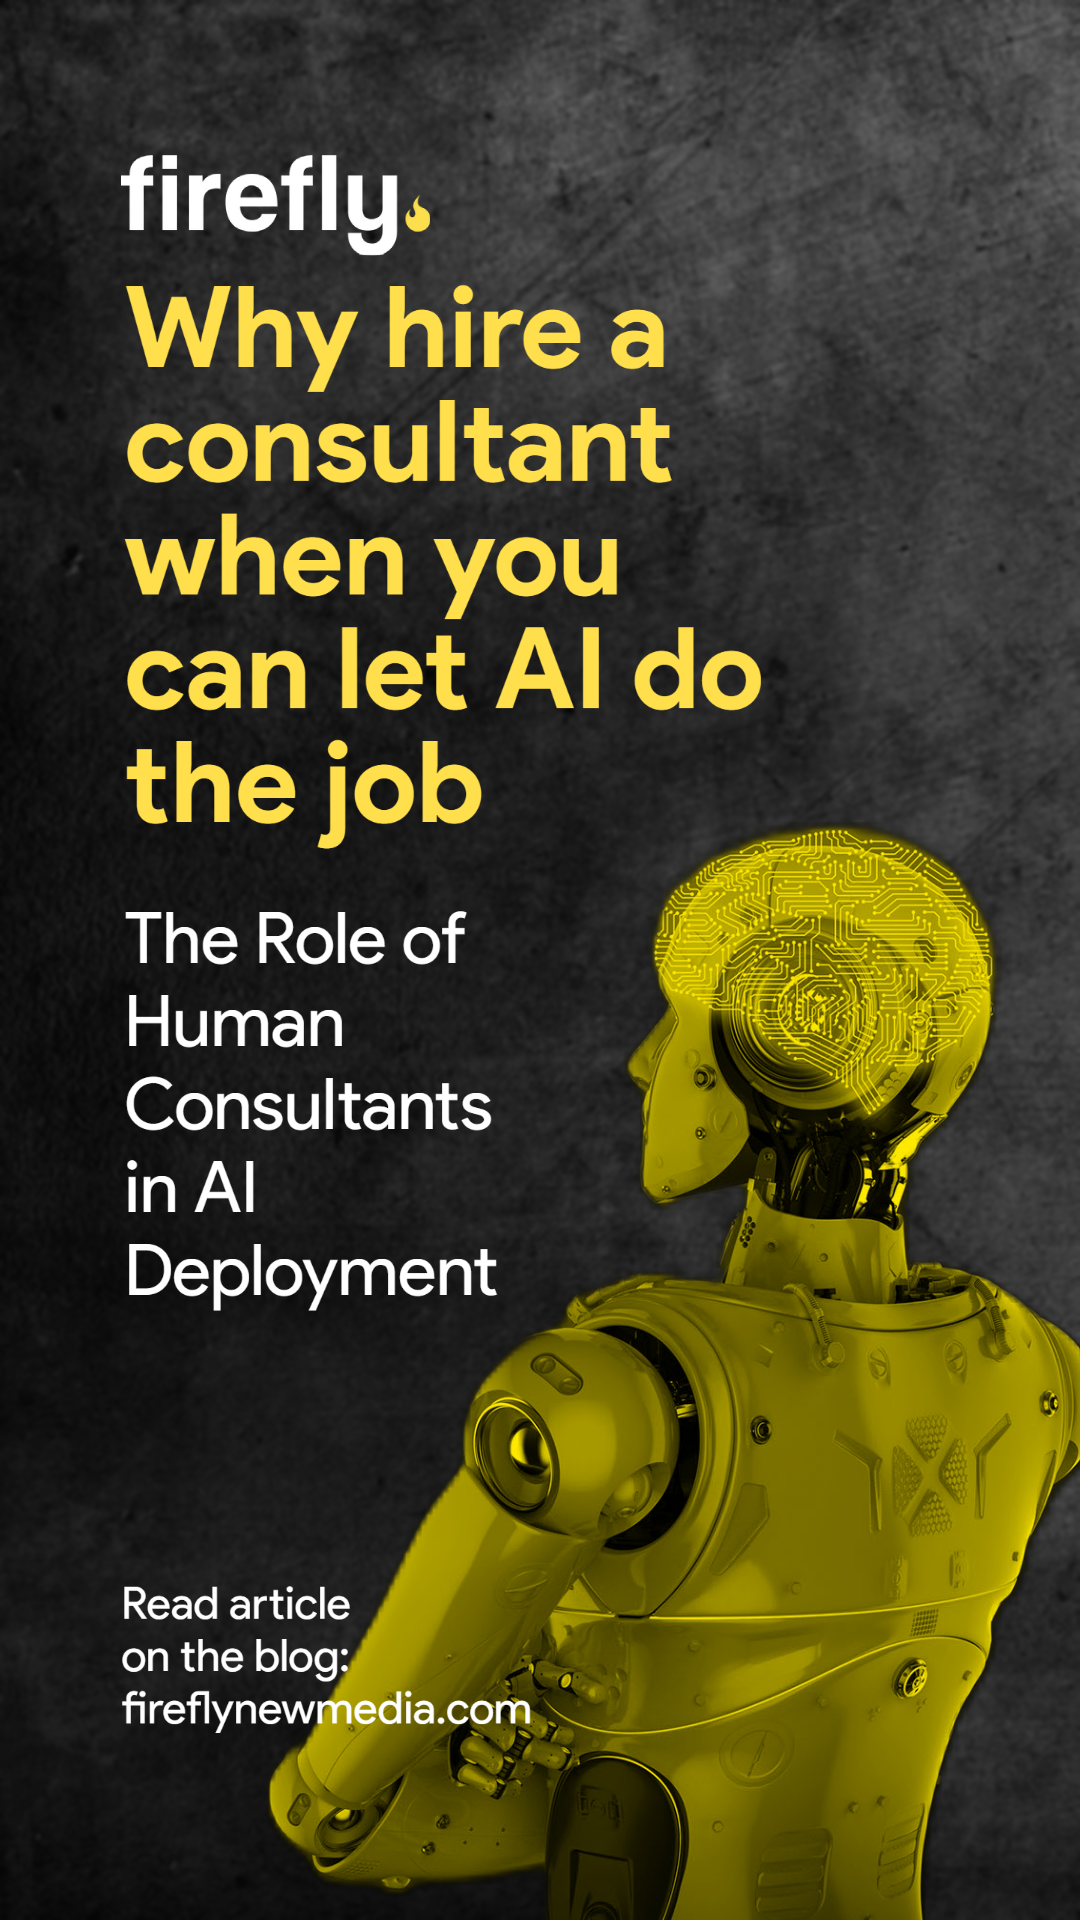 Why hire a consultant when you can let AI do the job